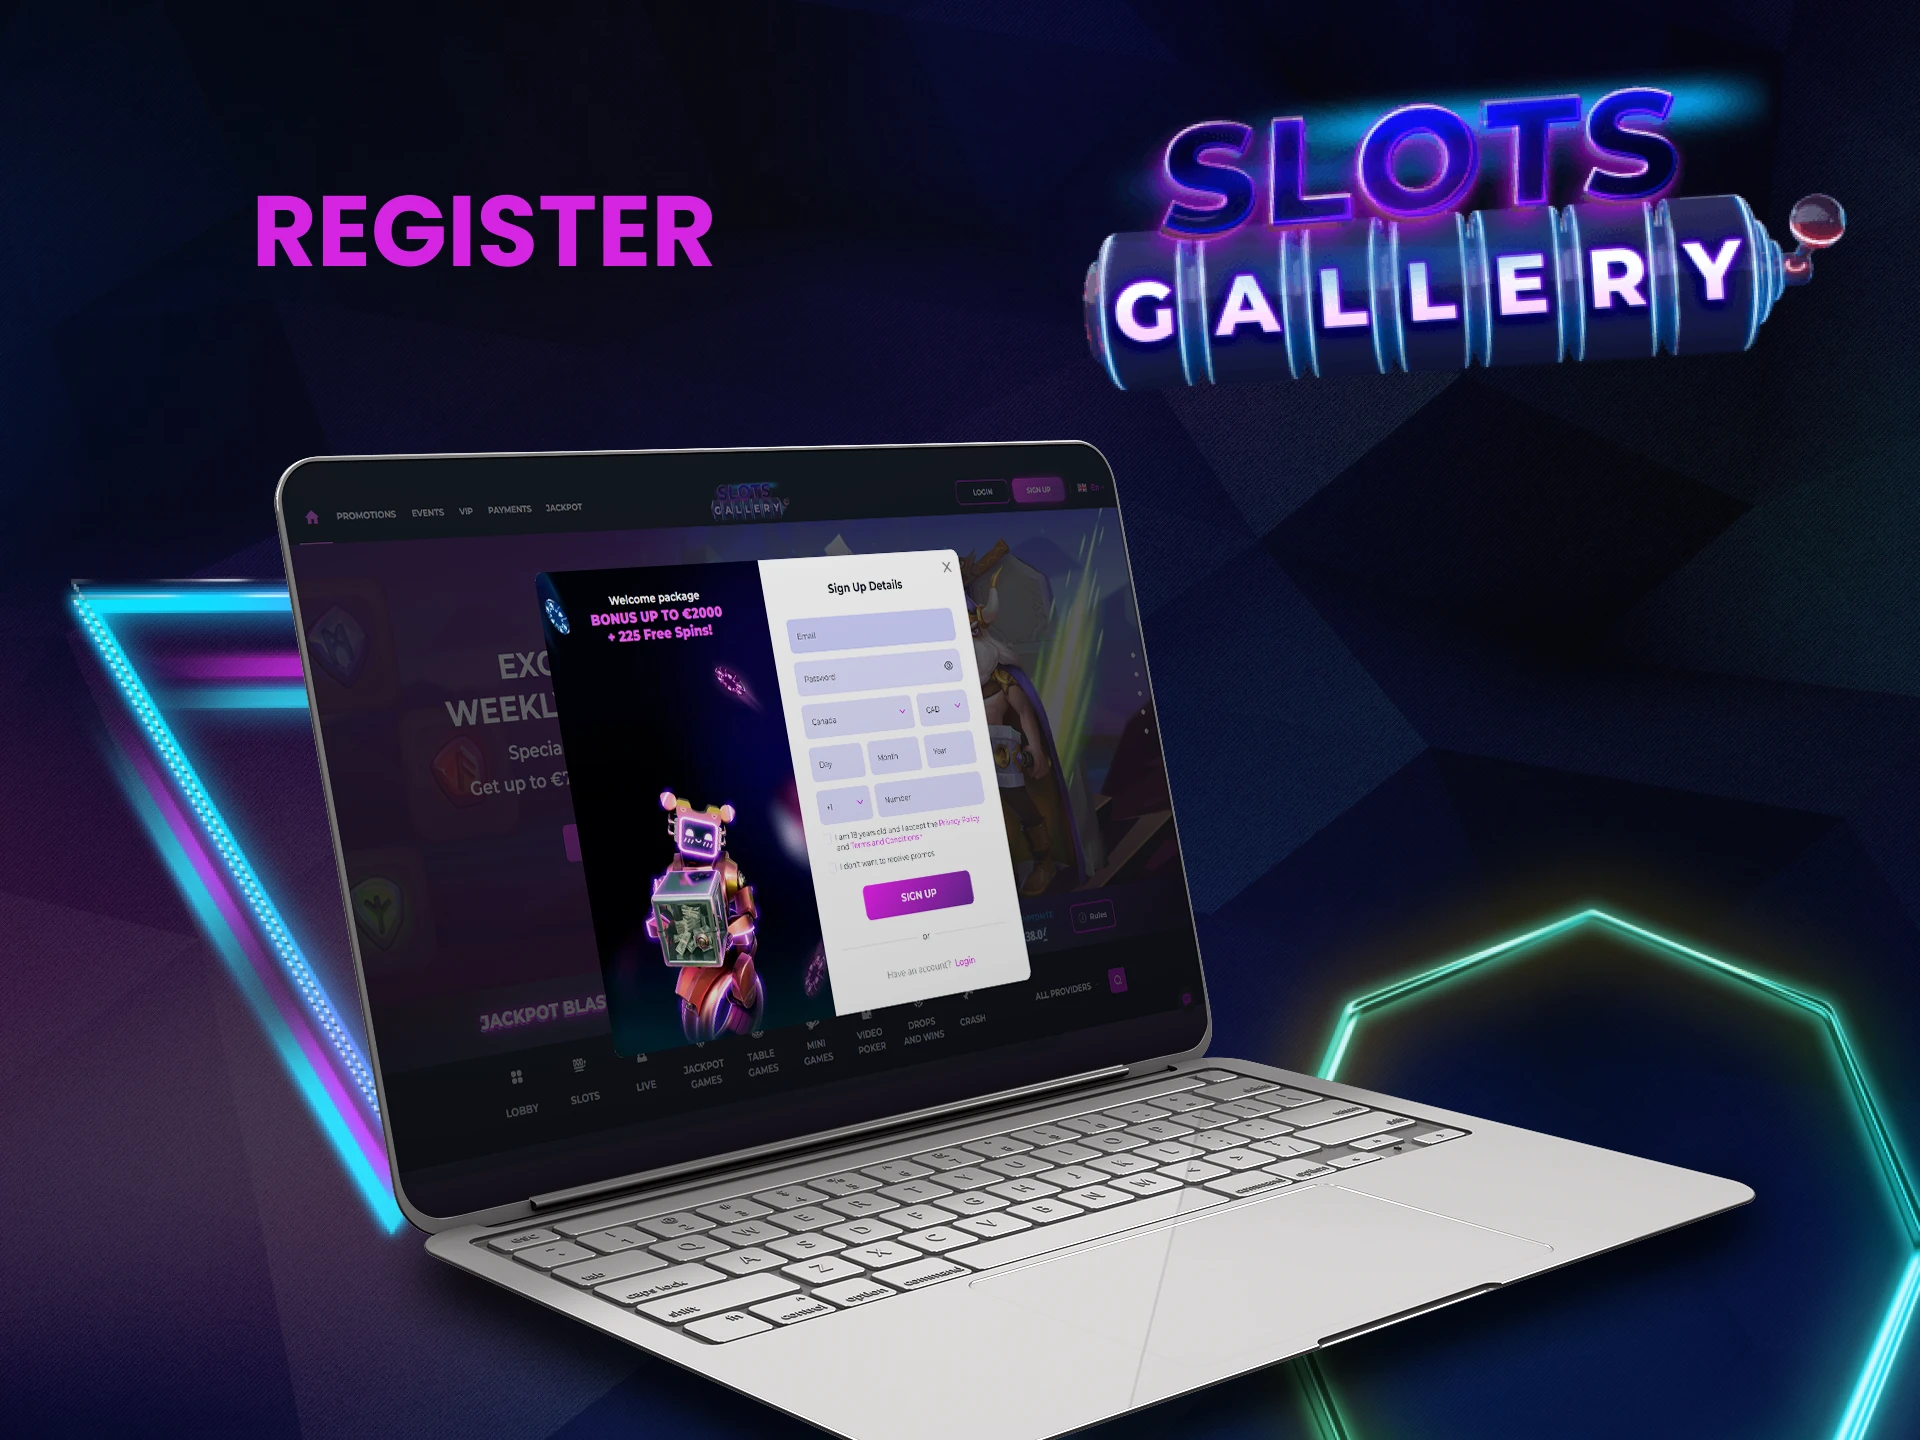 Create a personal account on Slots Gallery.